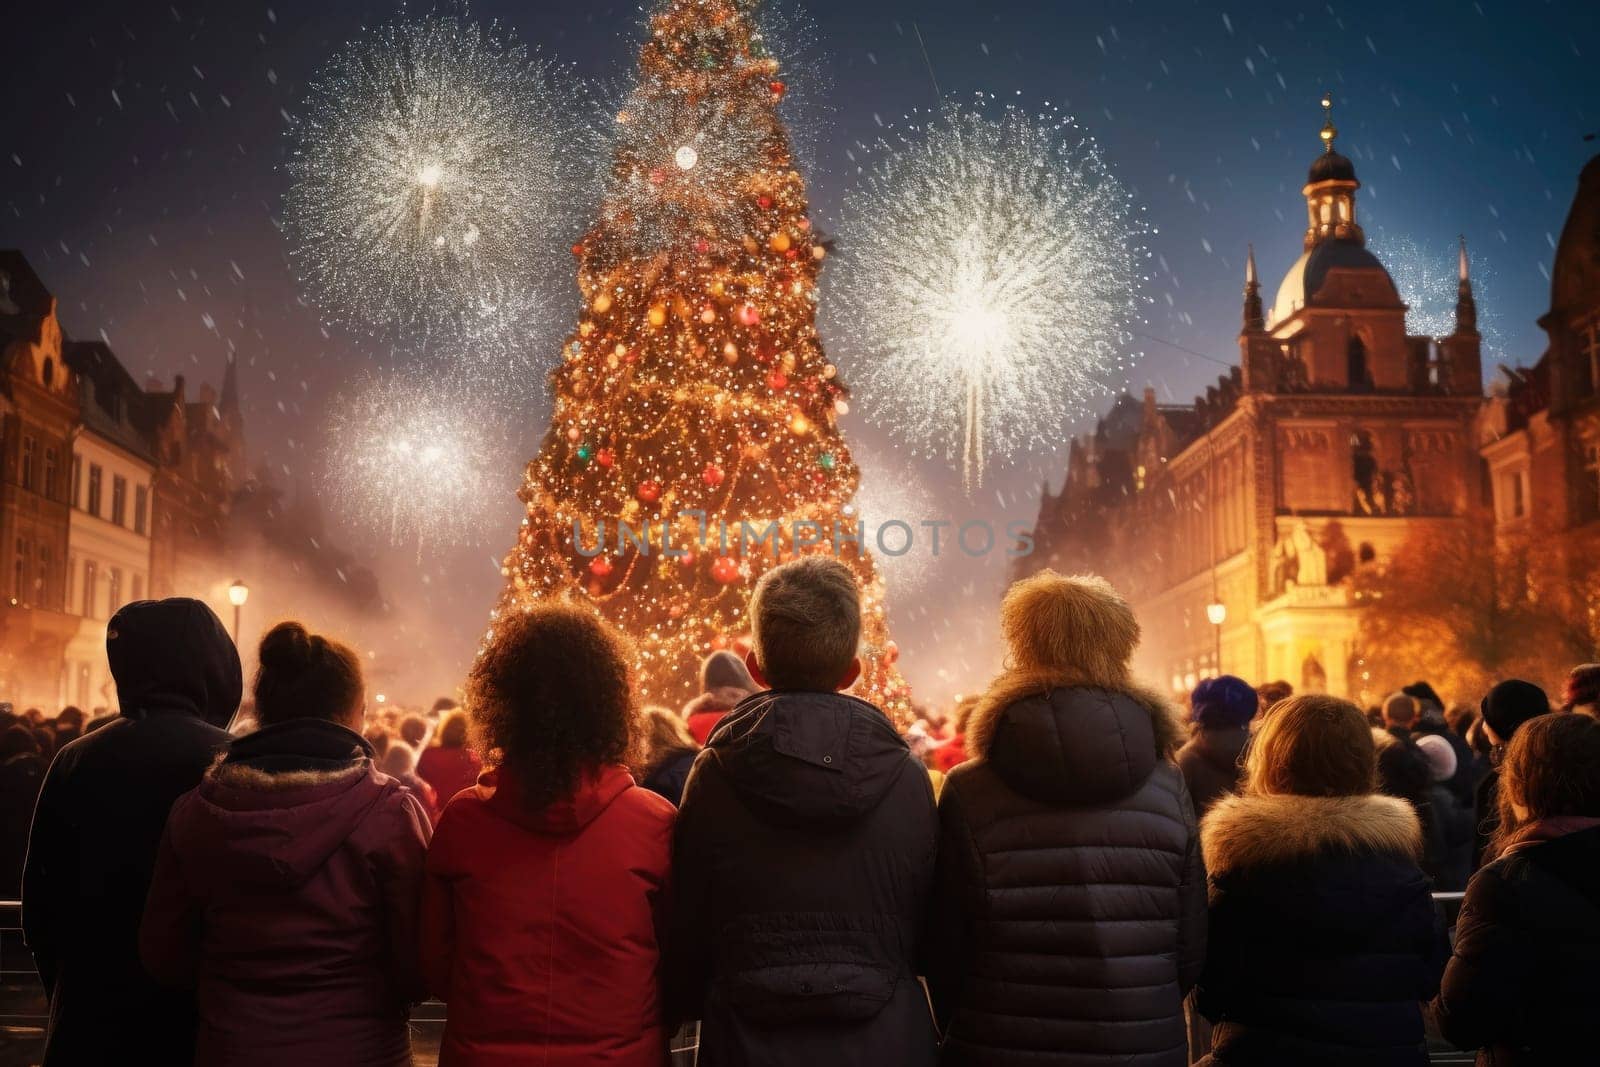 People enjoy Christmas, spending time in the town square with Christmas tree by andreyz